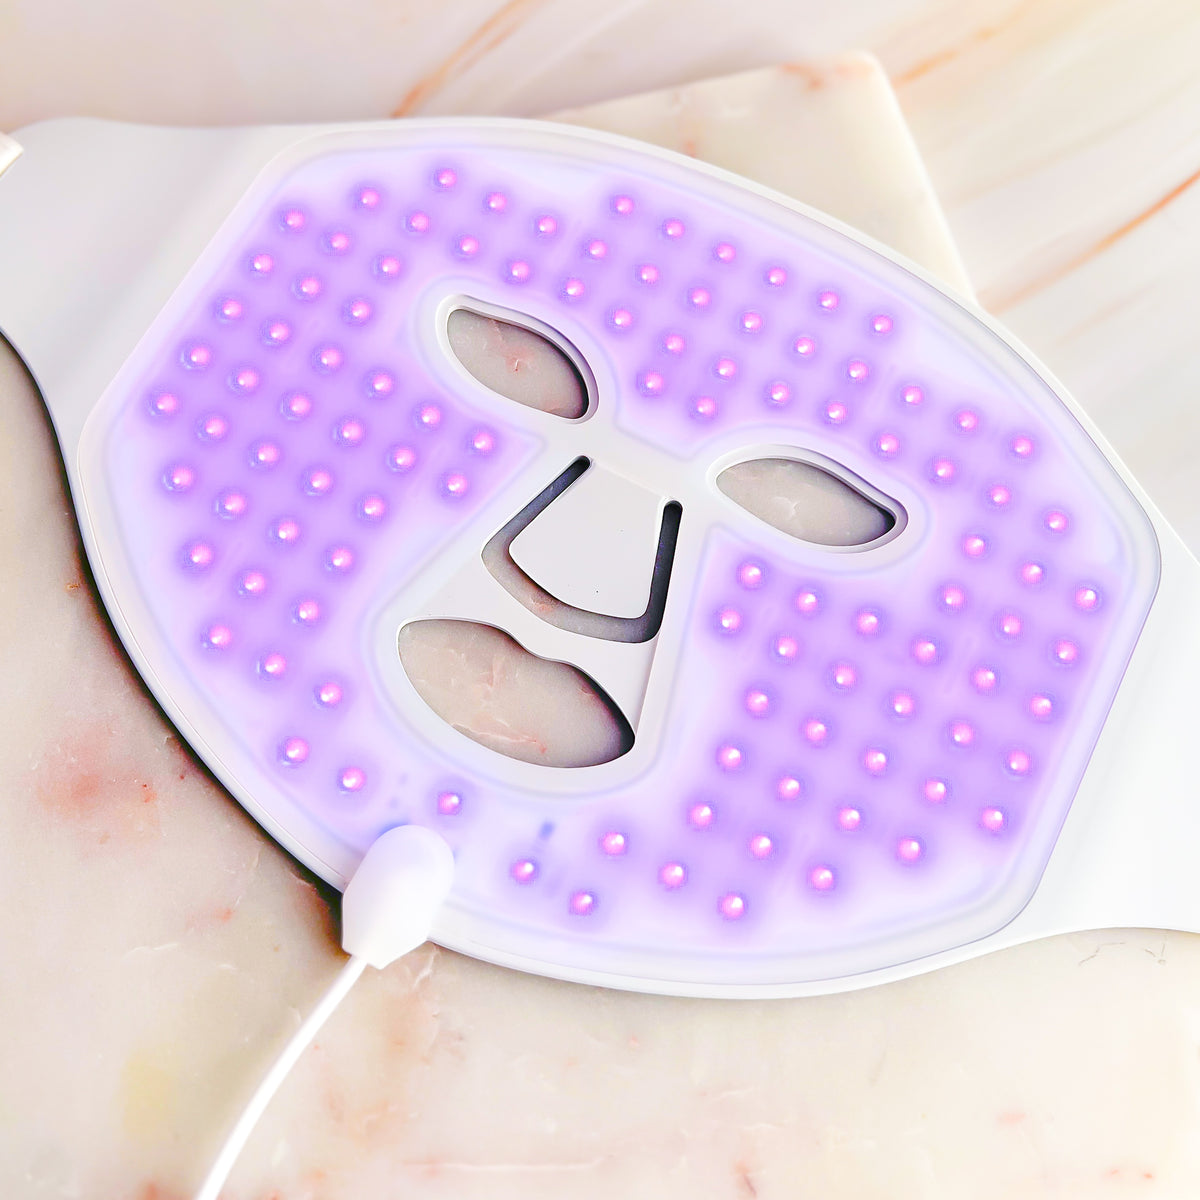 7 LED Silicone Therapy Mask - Spa-Grade for Radiant Skin at Home